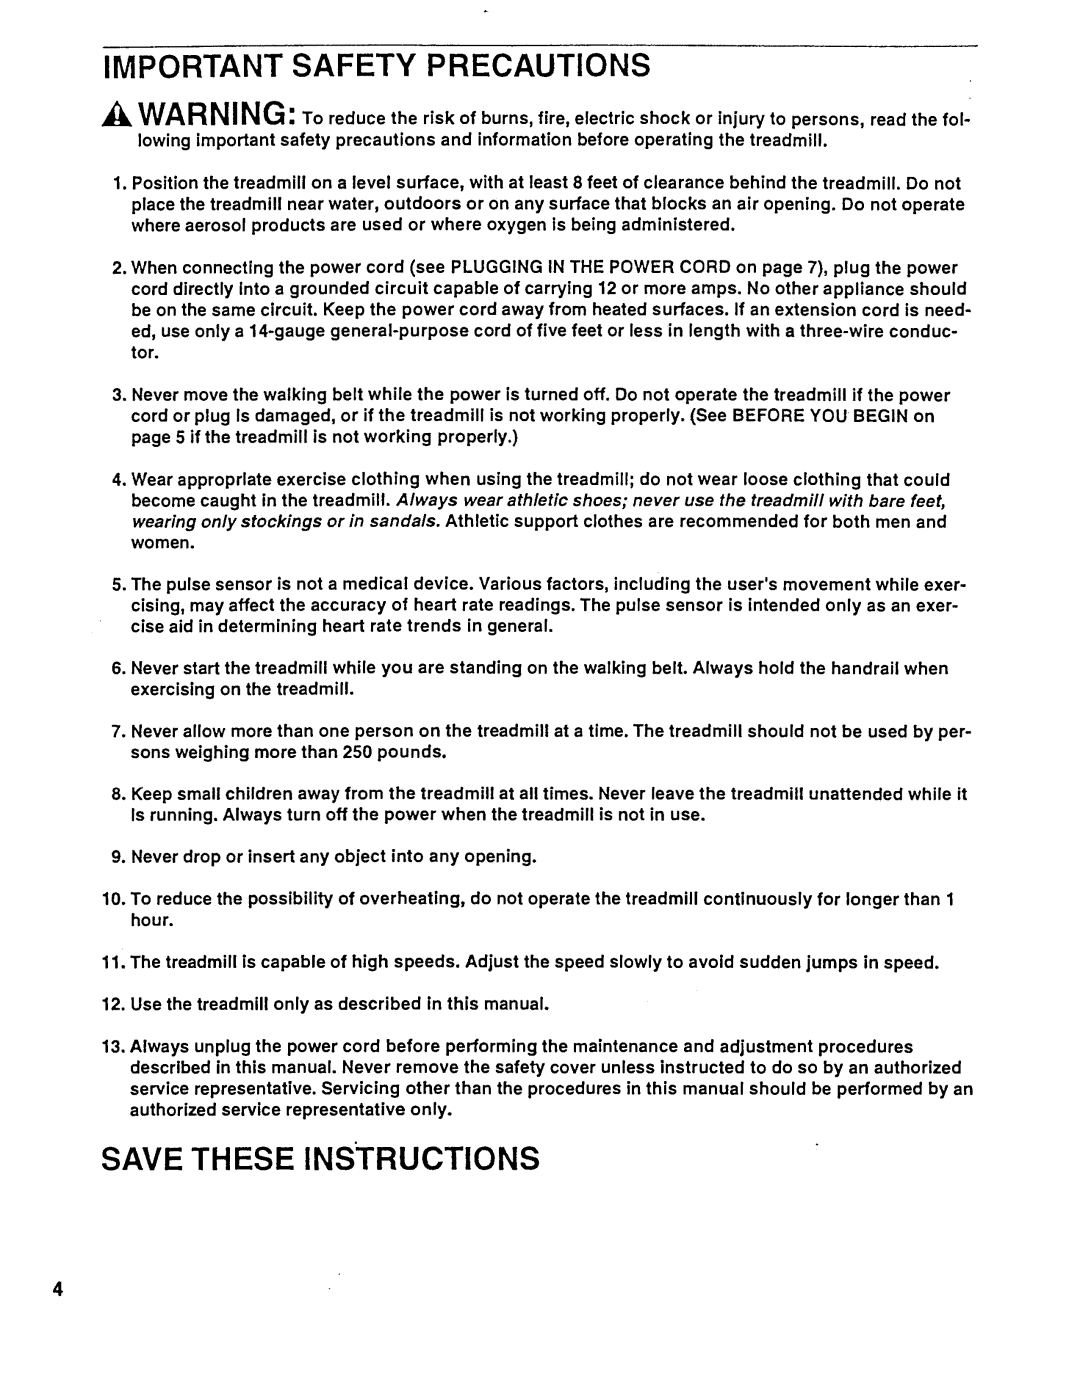 Sears 831.297451 owner manual Save These Instructions, Important Safety Precautions 